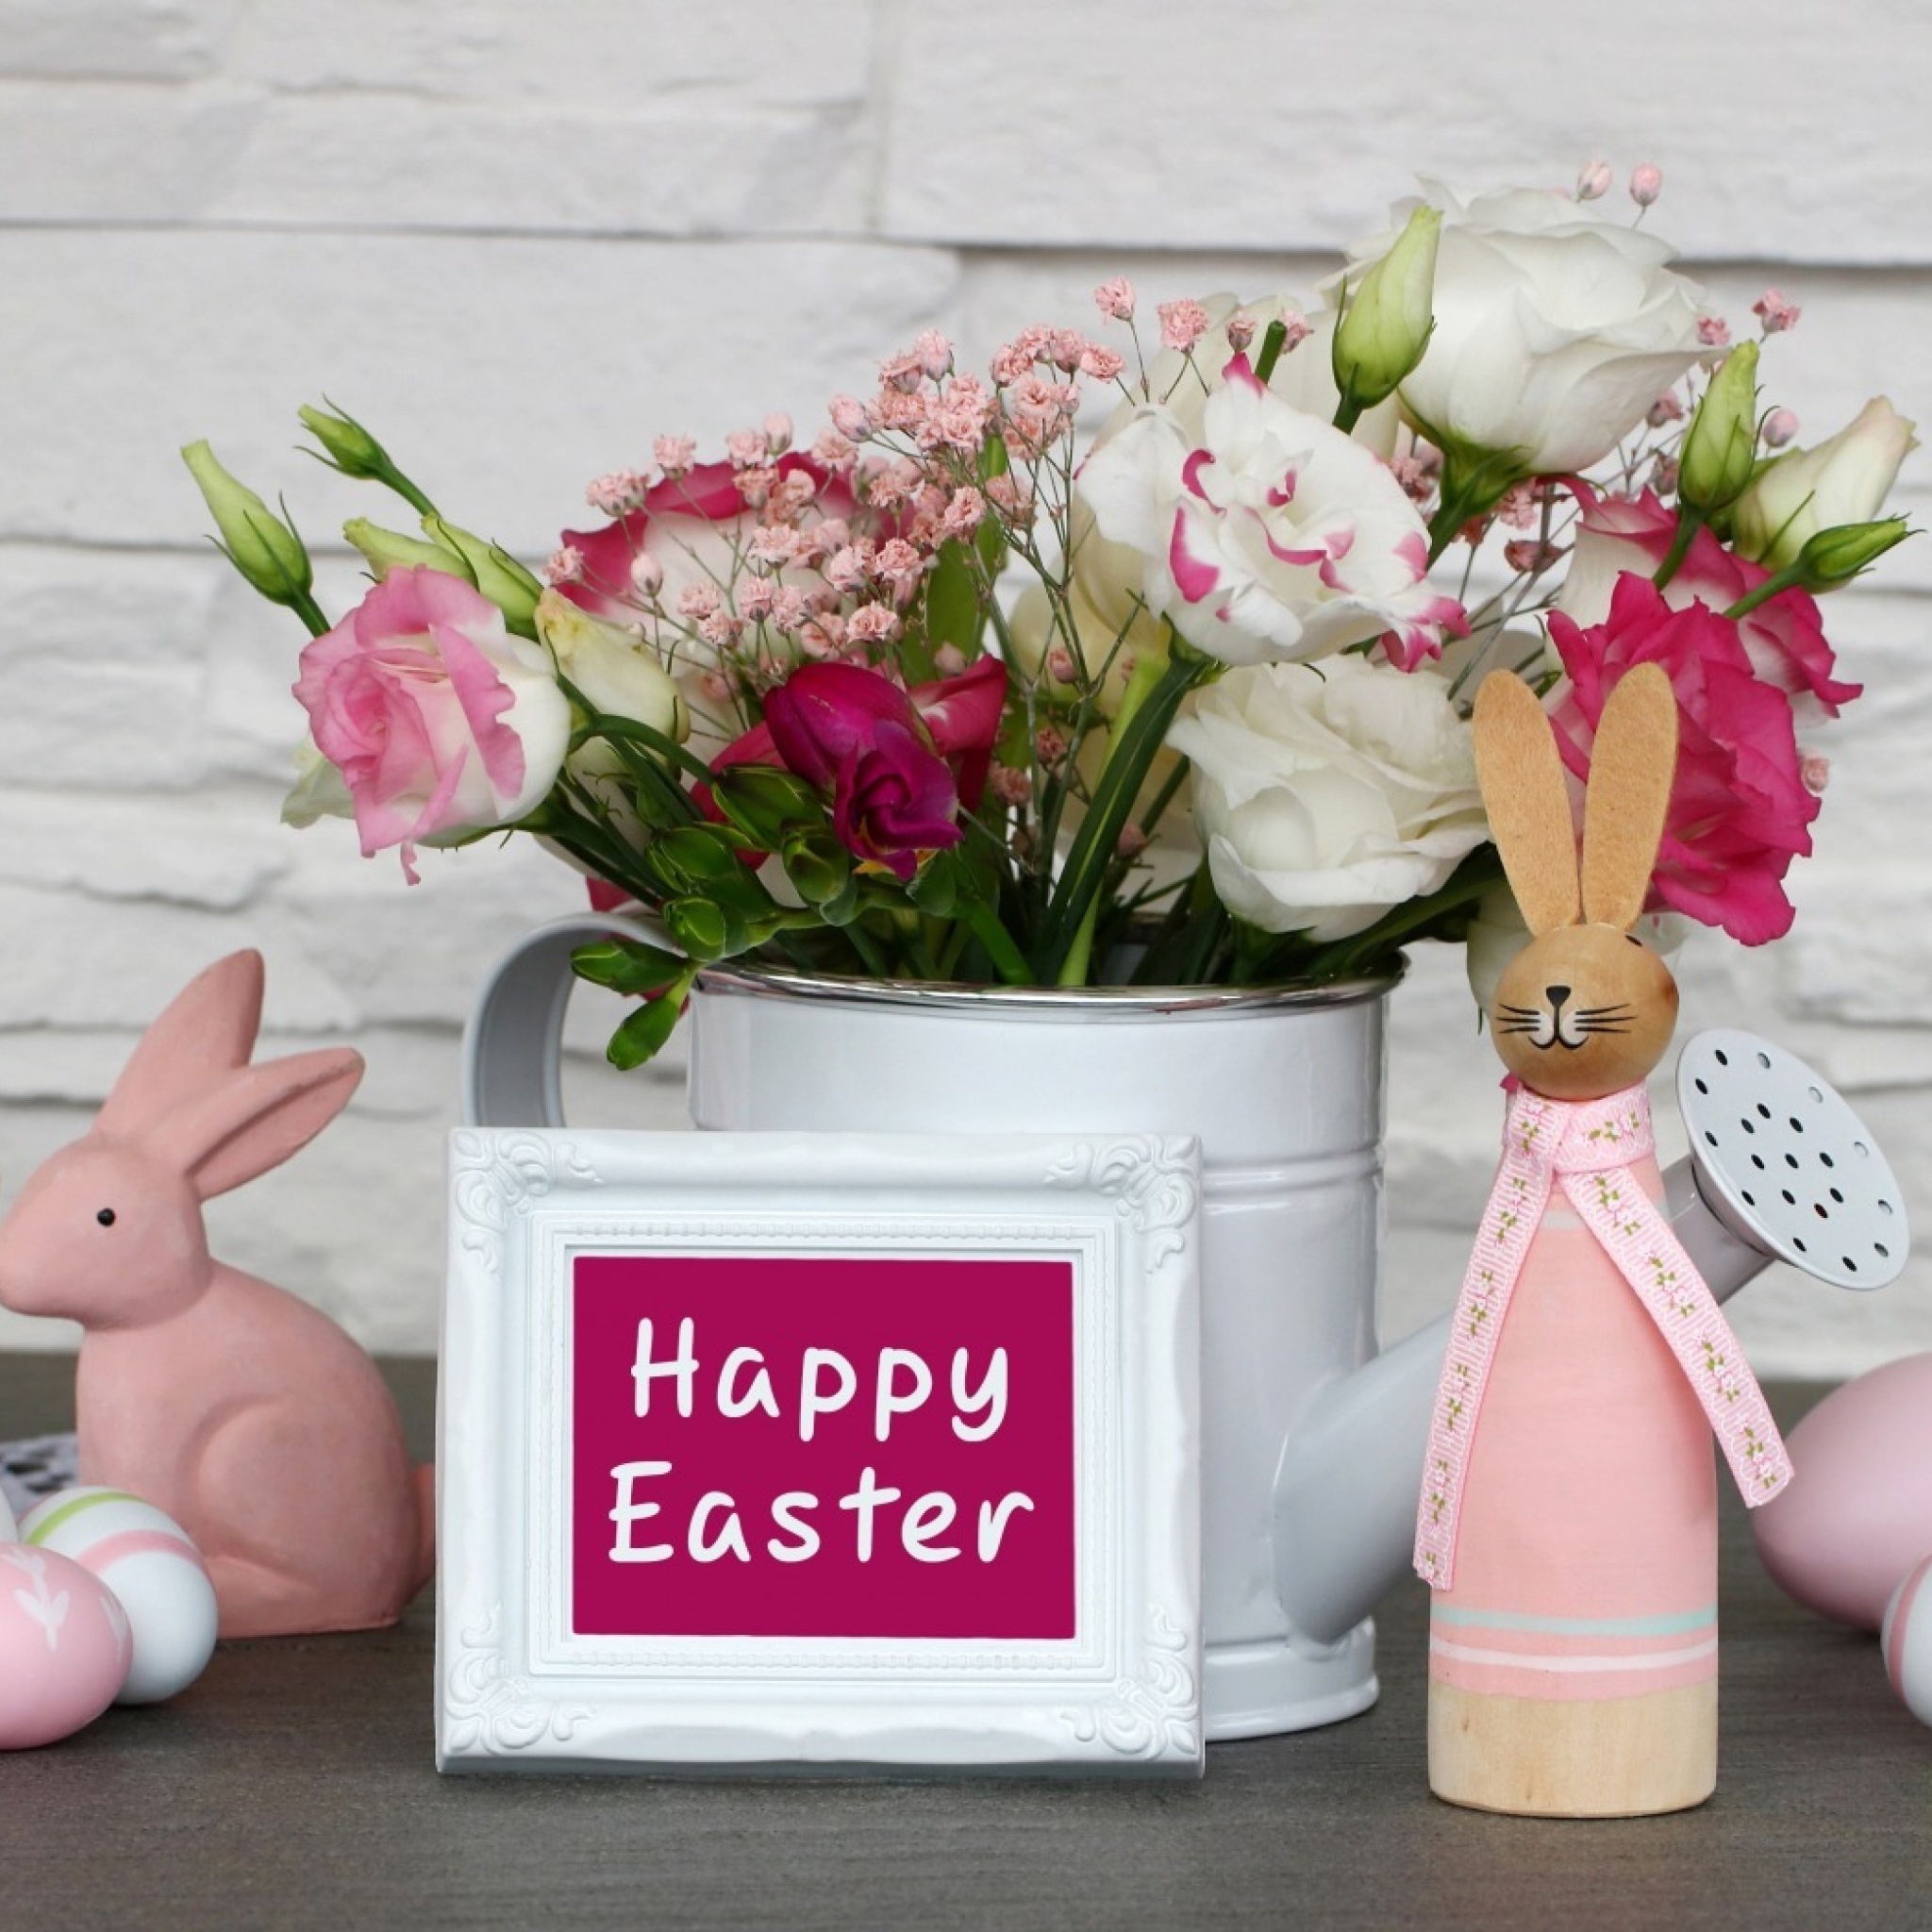 Happy Easter with Hare Figures screenshot #1 2048x2048